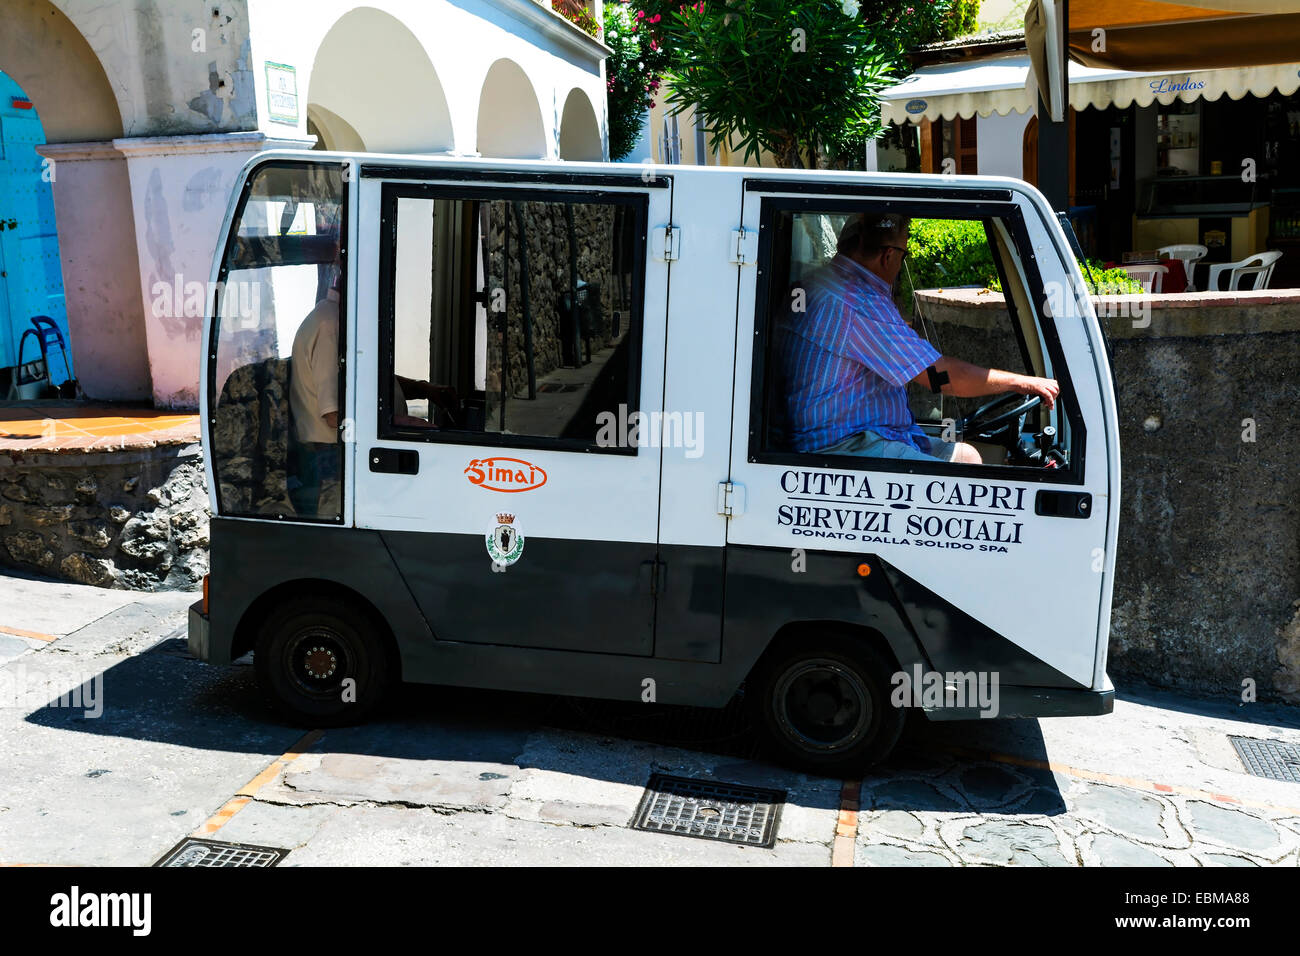 Municipal transport using tiny vehicles to negotiate some of the narrow lanes and alleys on the island of Capri. Stock Photo